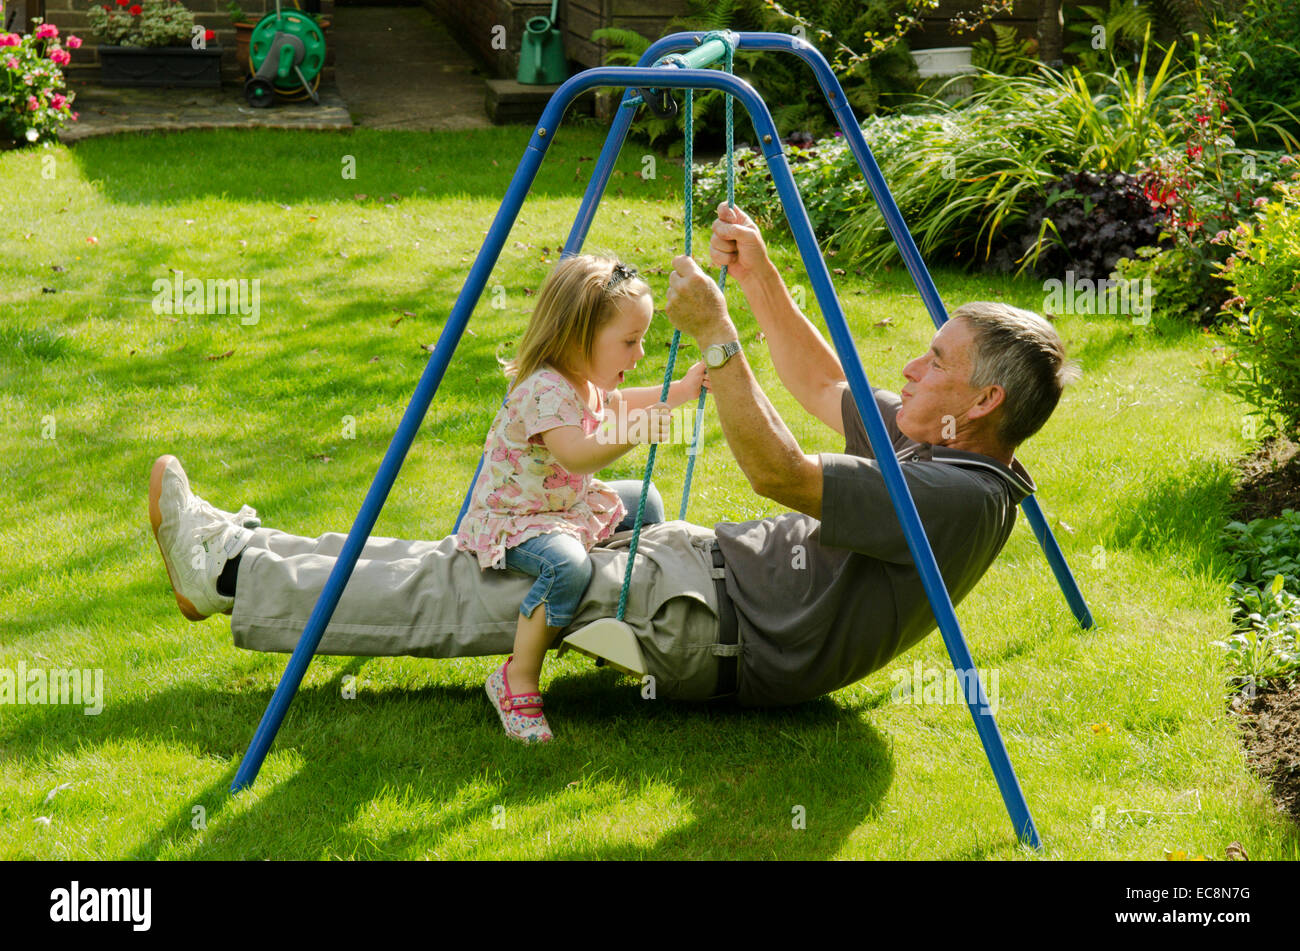 Grandfather and granddaughter sitting on swing in garden. England, UK. September Stock Photo